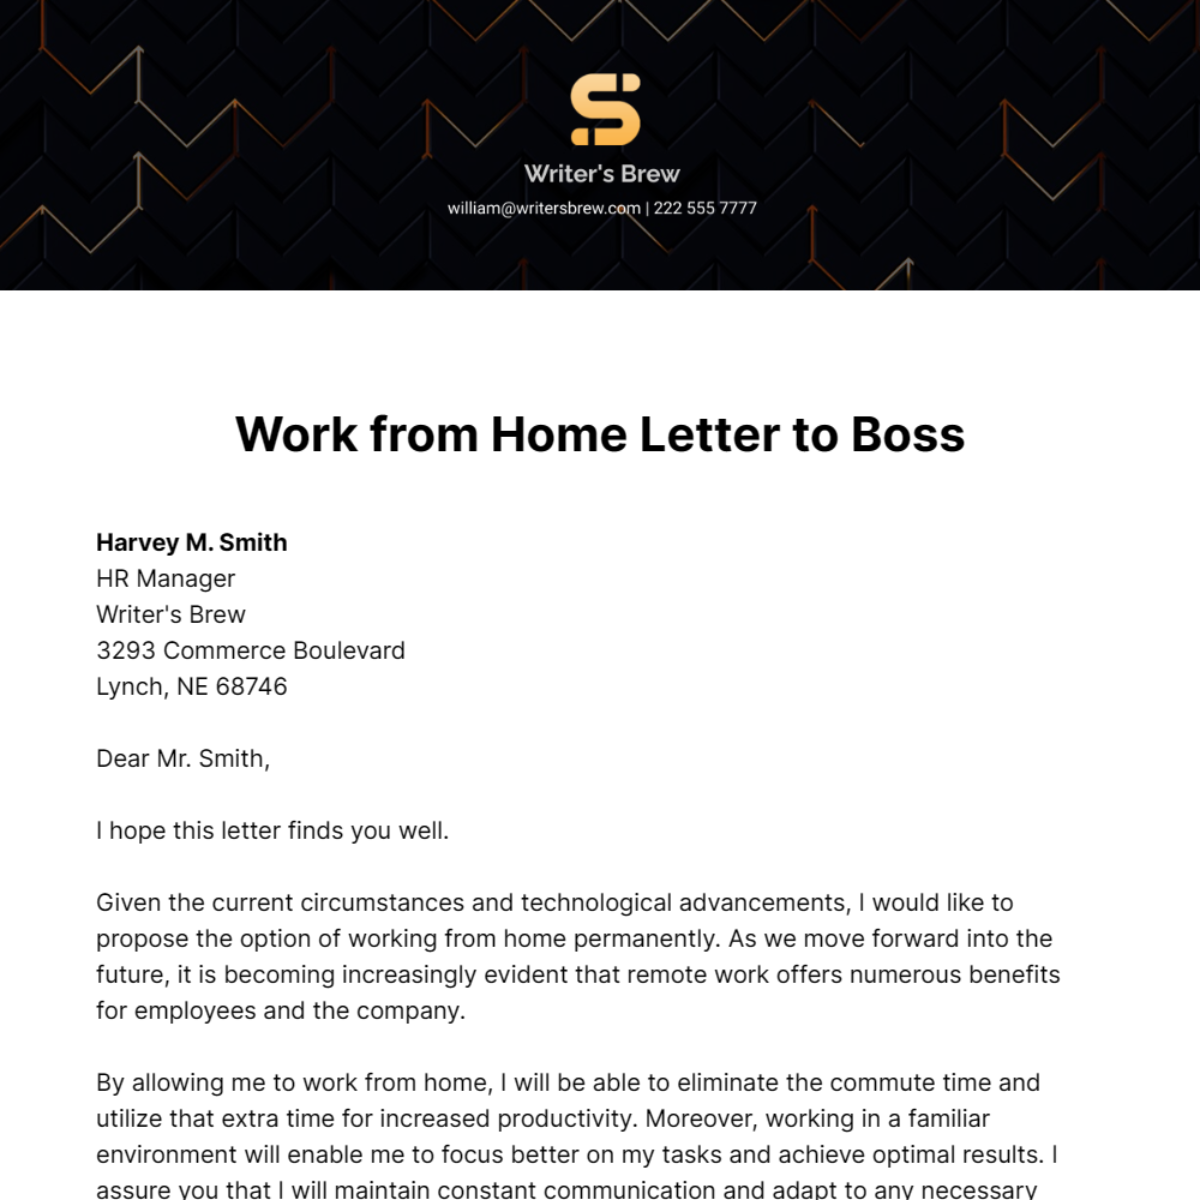 Work from Home Letter to Boss   Template